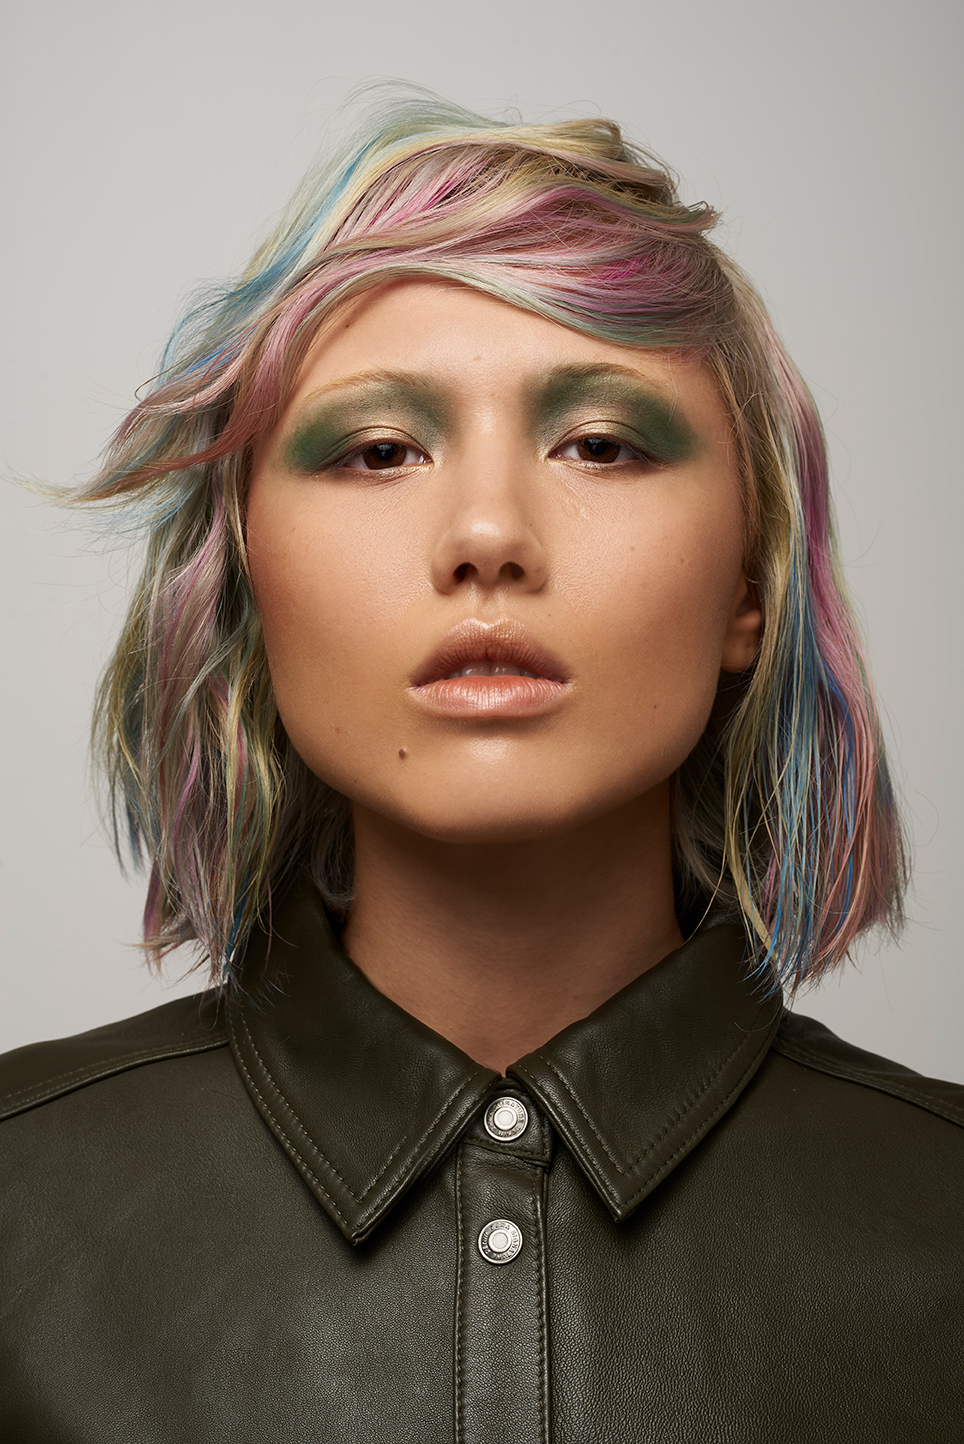 Model on a grey background with coloured hair.